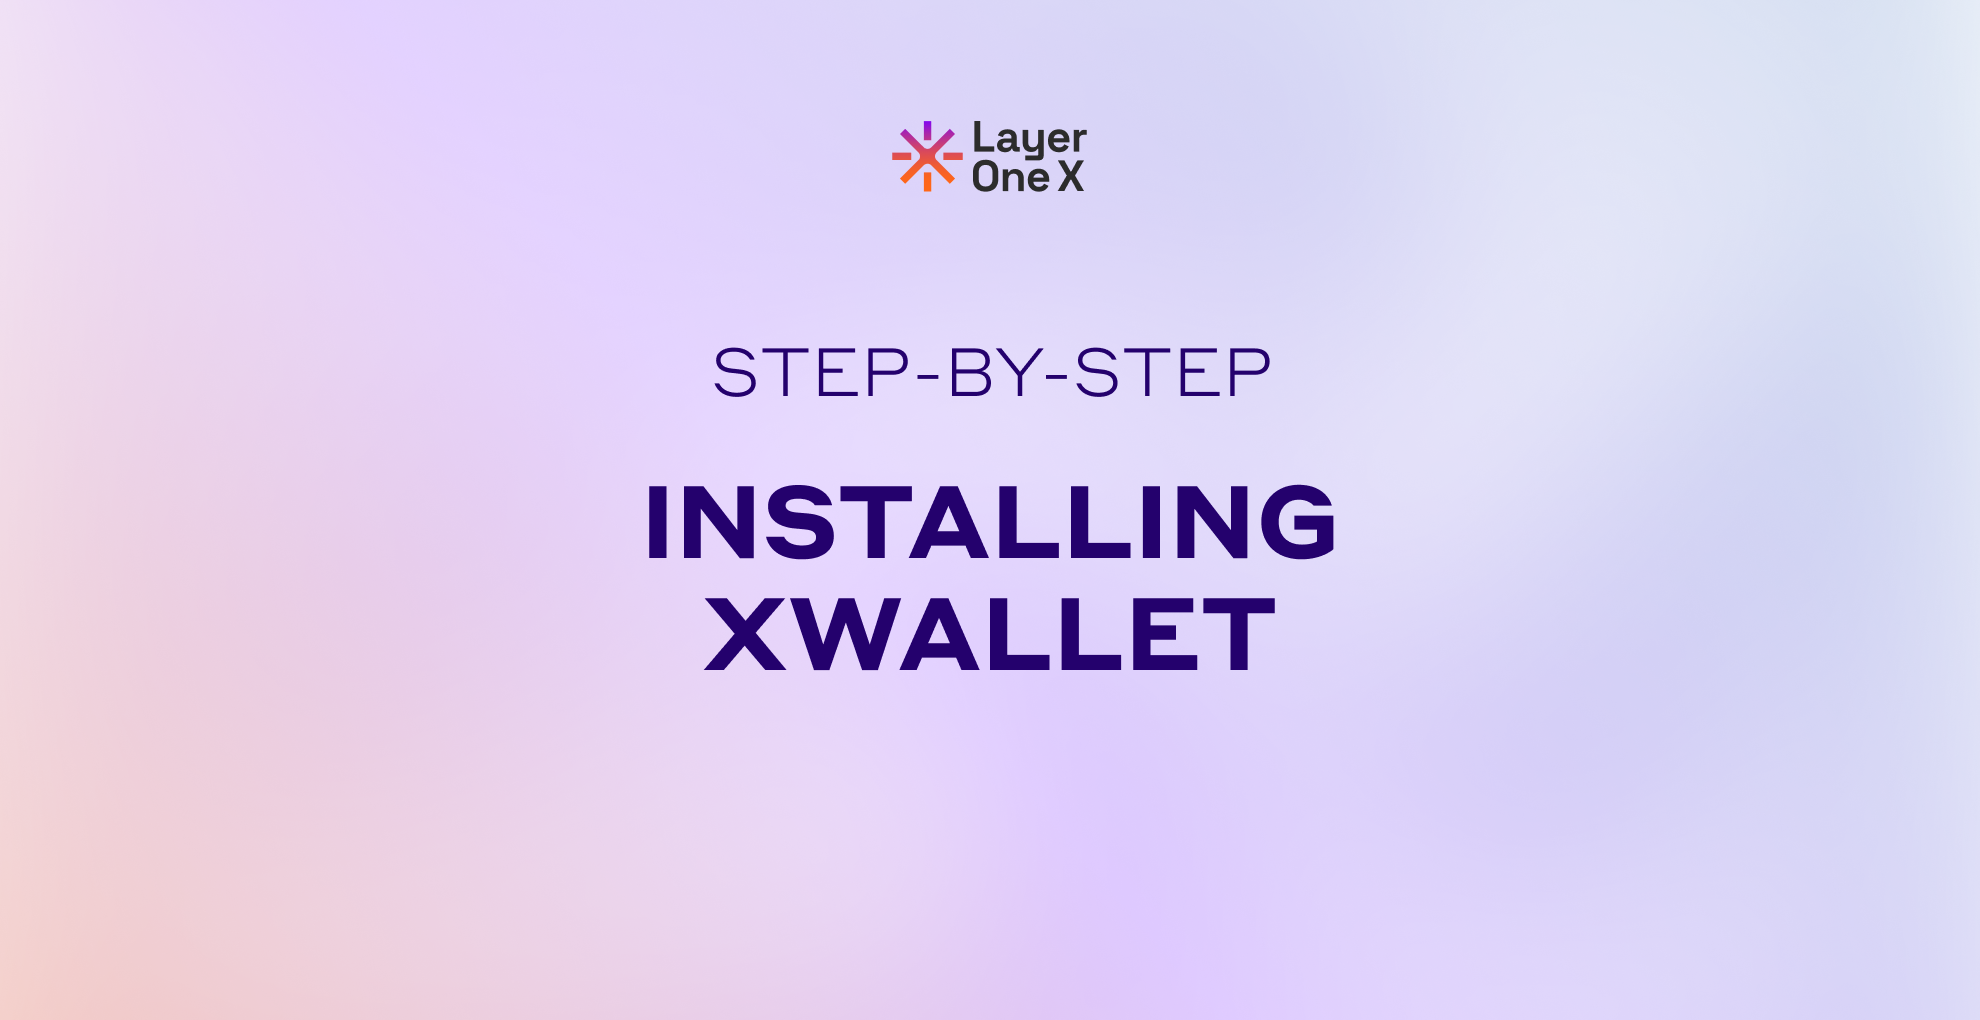 A step-by-step guide to installing your XWallet